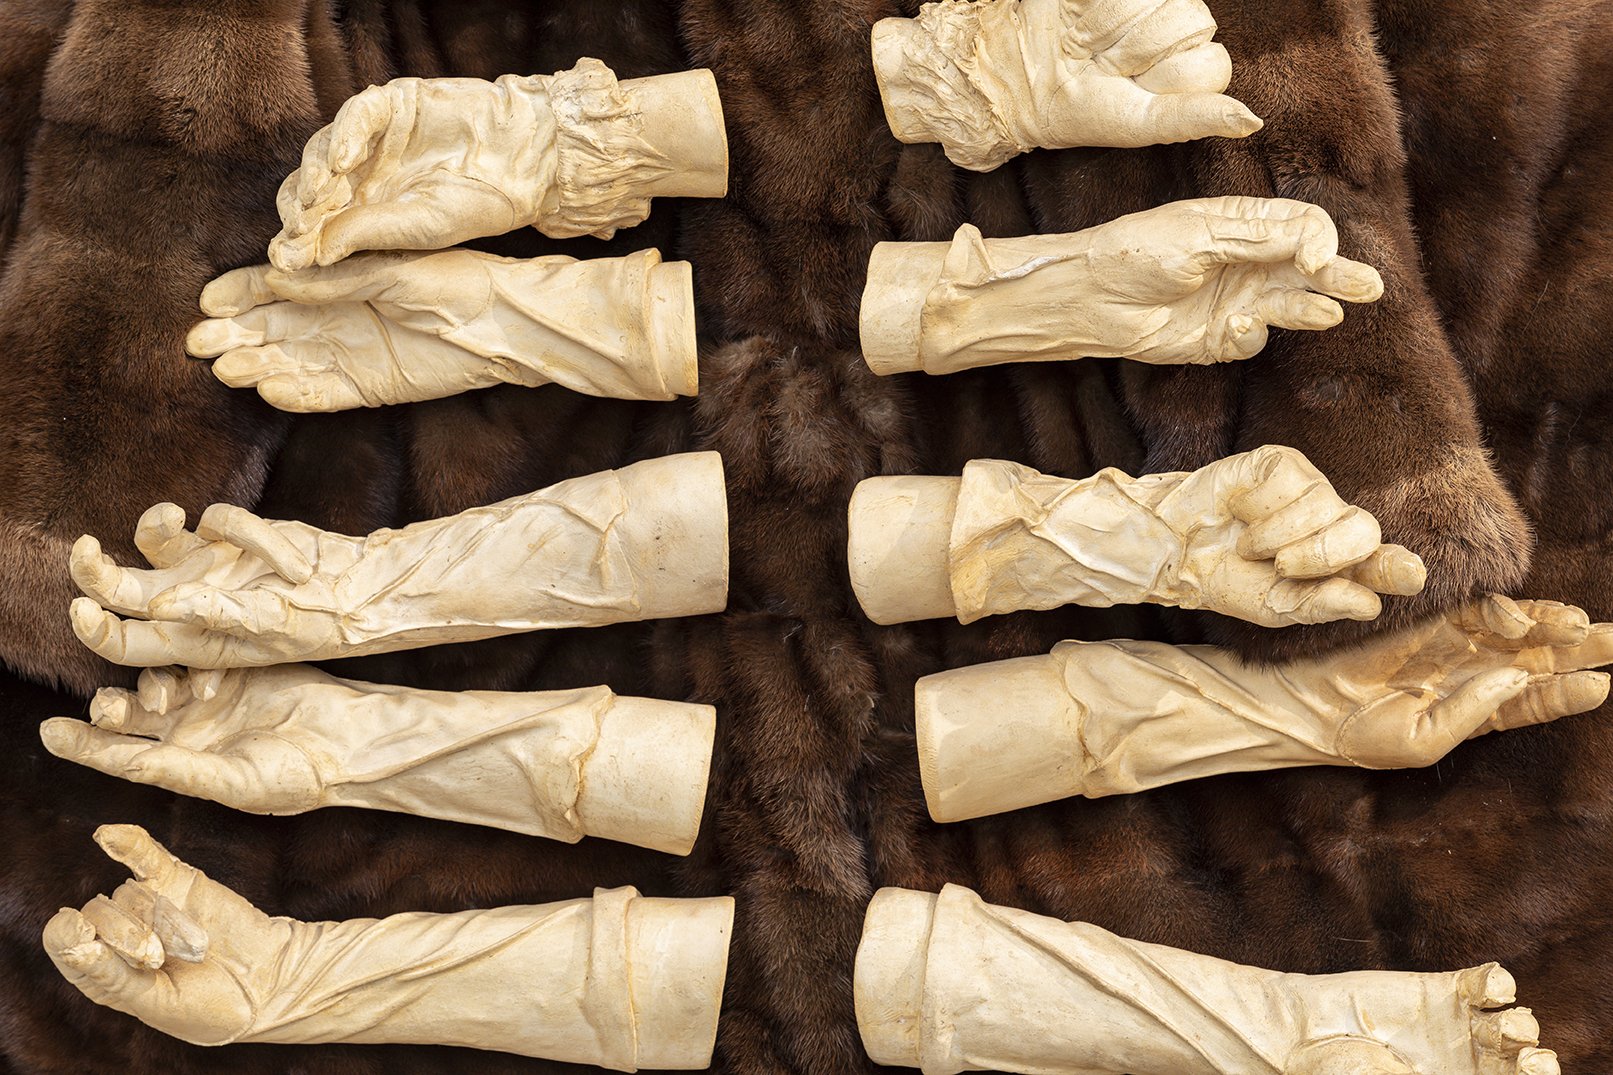  Marsha Pels,  Écorché  (detail), 2006-2008. Patined cast plaster, 10 pairs of Pels’ arms cast in her mother’s gloves, her mother’s mink coat. 47 x 47 x 14 inches  